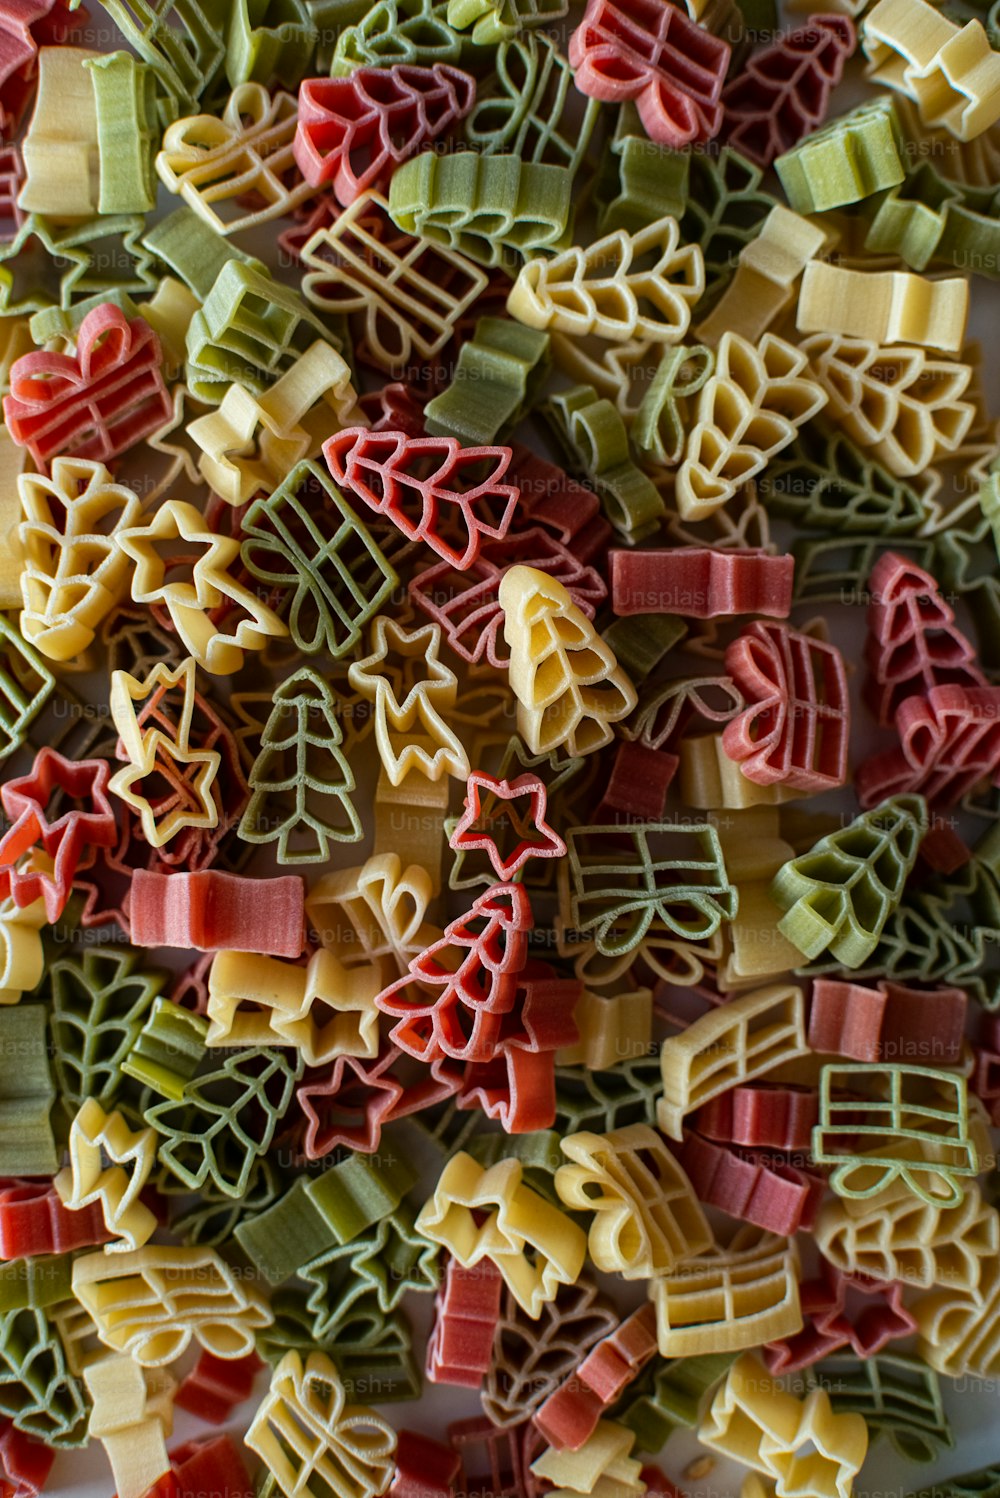 a close up of a plate of pasta